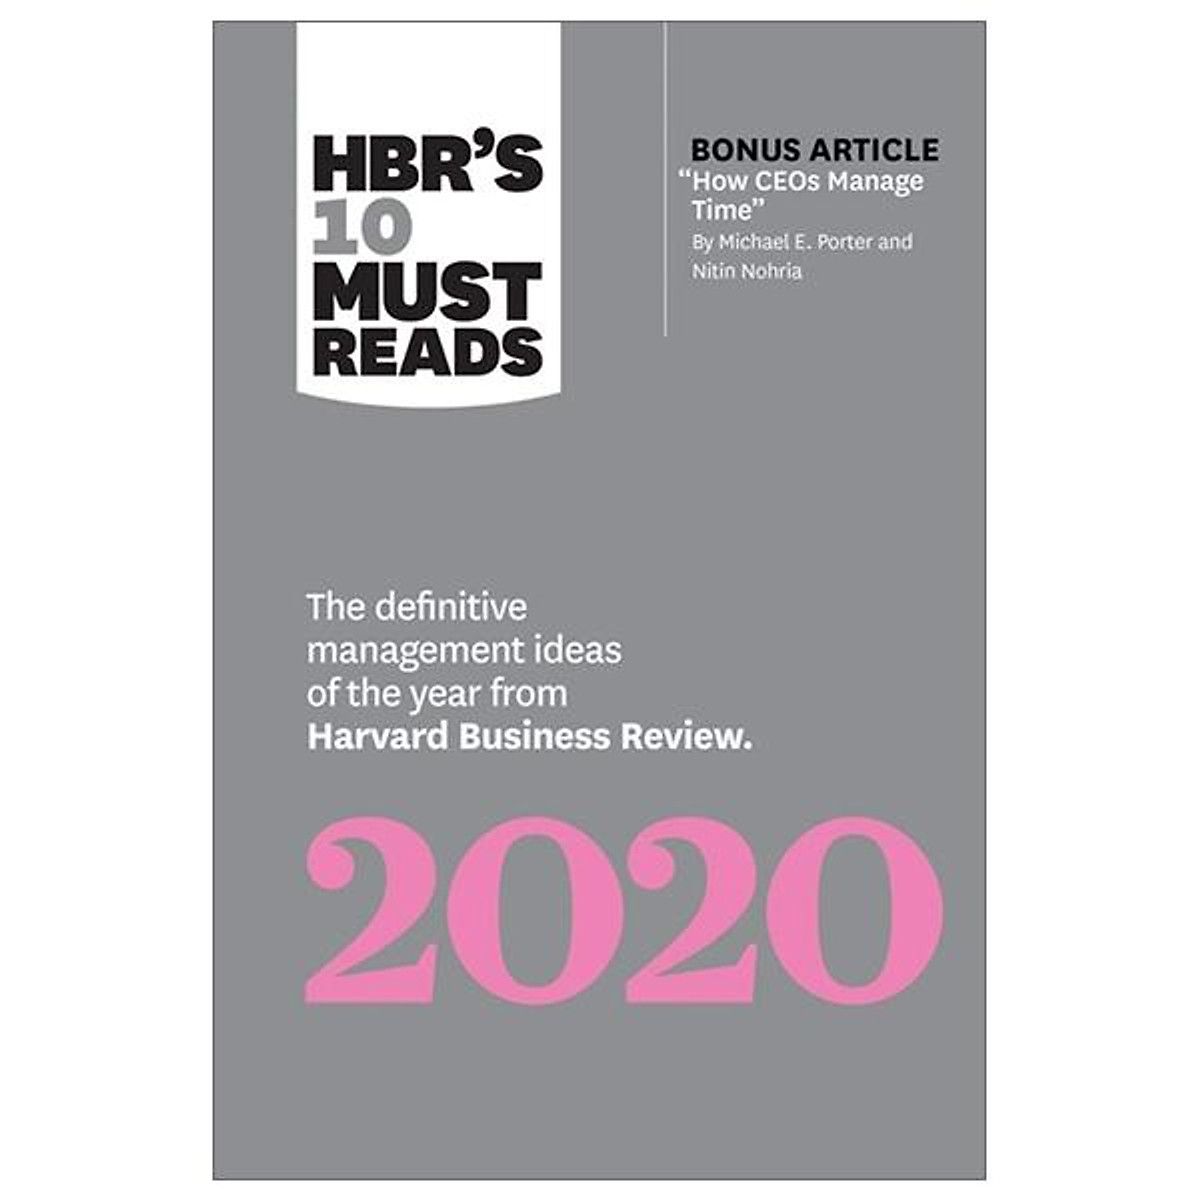 HBR's 10 Must Reads 2020: The Definitive Management Ideas Of The Year From Harvard Business Review